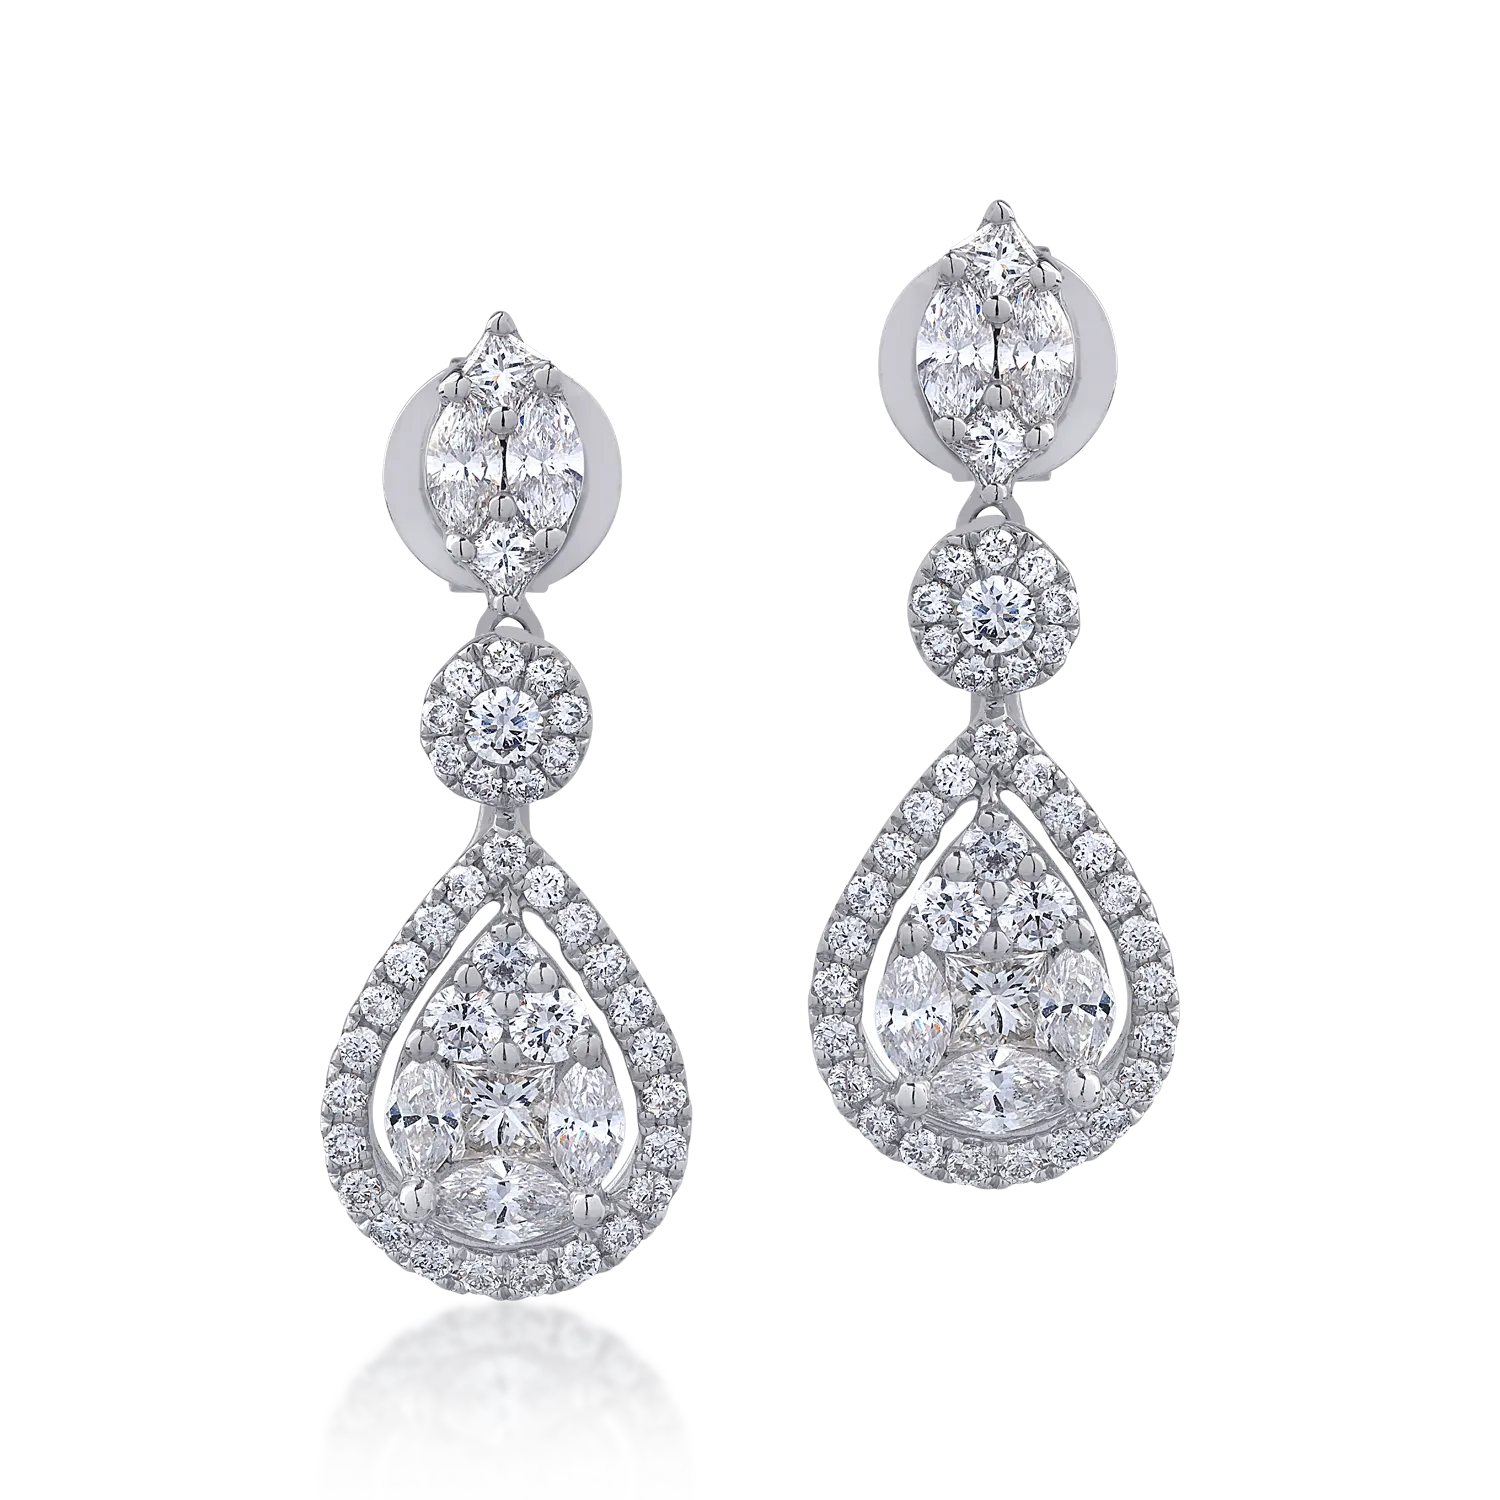 18K white gold earrings with 1.83ct diamonds